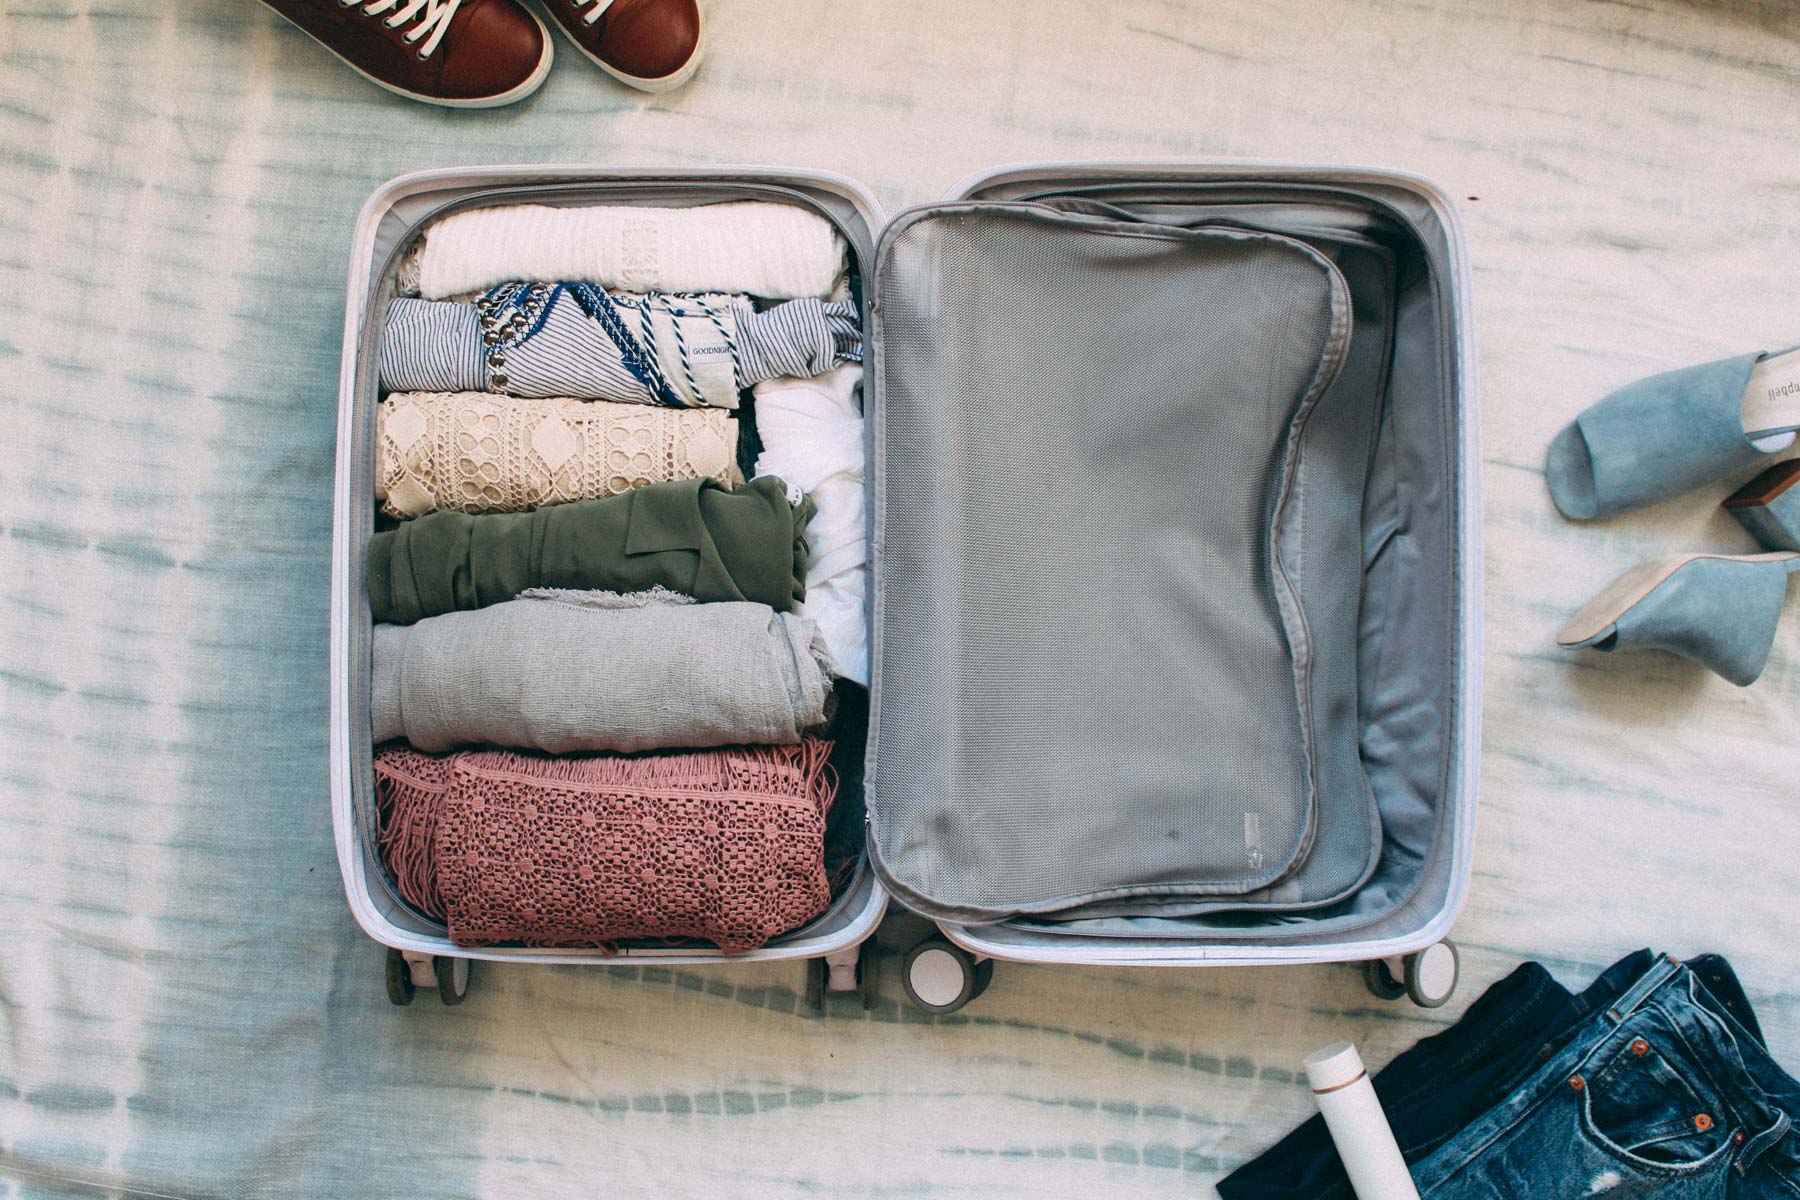 compressed mattresses you can pack in suitcase